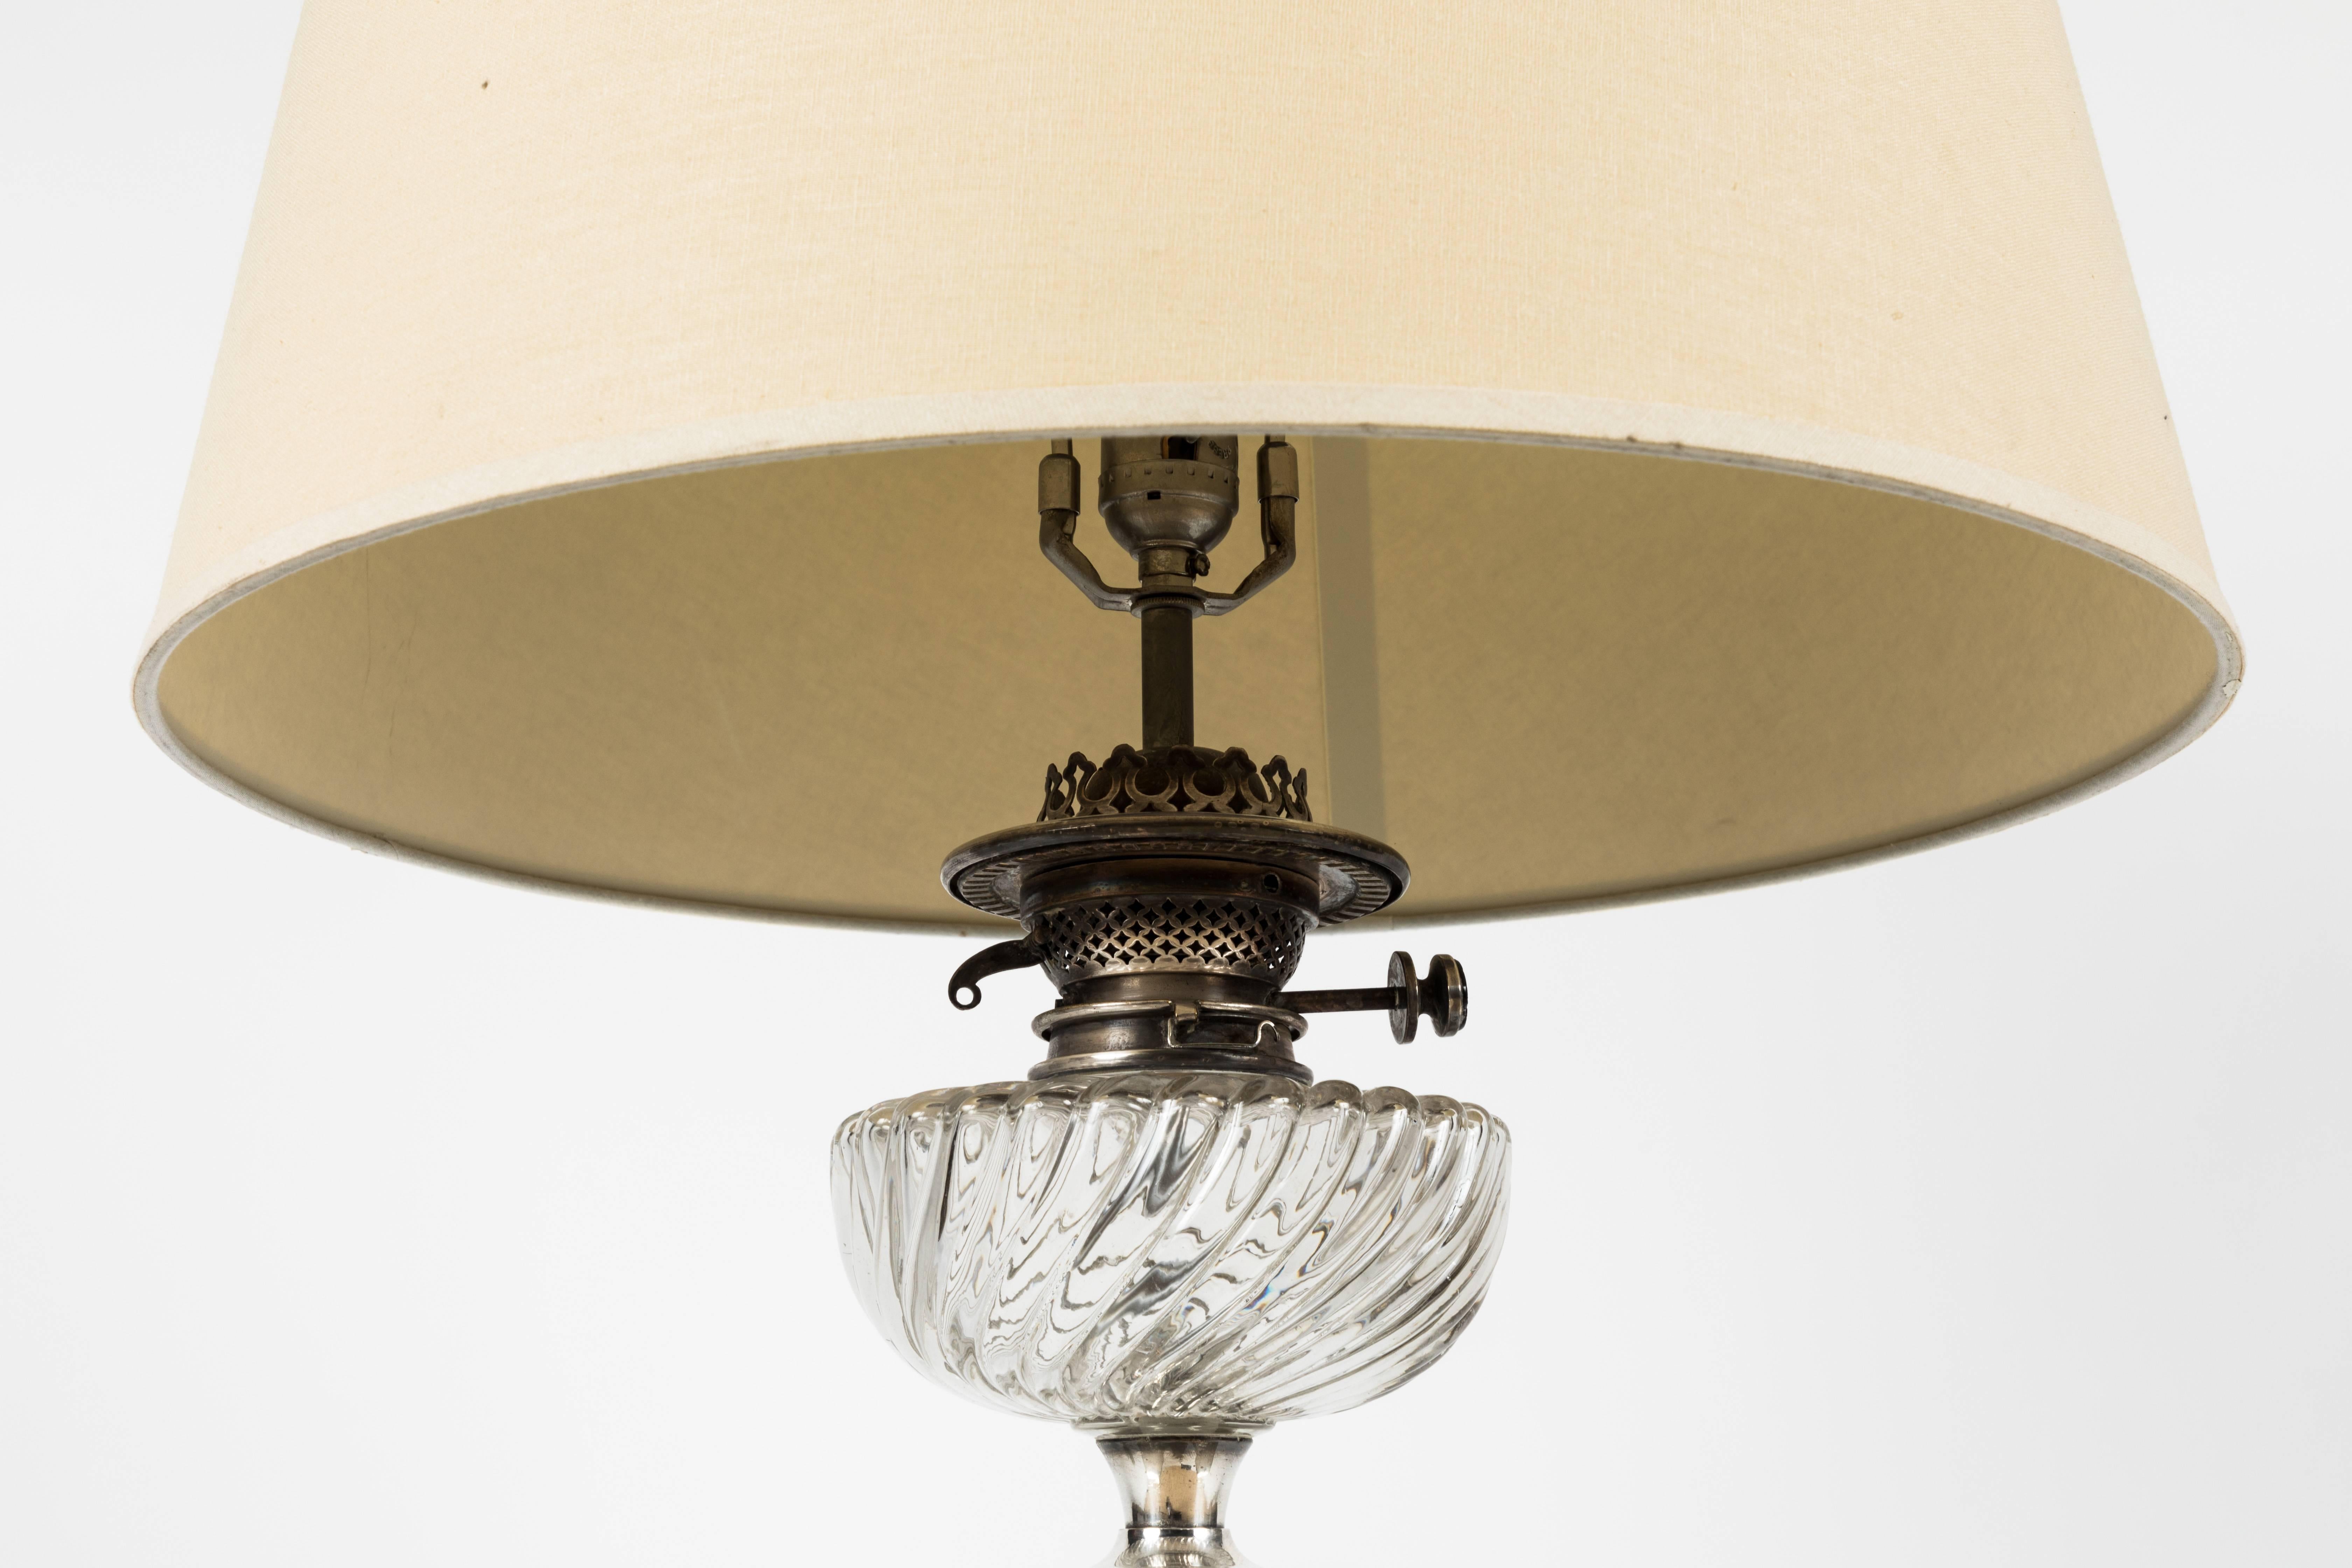 Antique English oil lamp, converted to electrical table lamp. Corinthian fluted column with glass. Silver plated brass with stepped detail around base. Recently electrified with three-way in line switch and custom made paper shade included. 